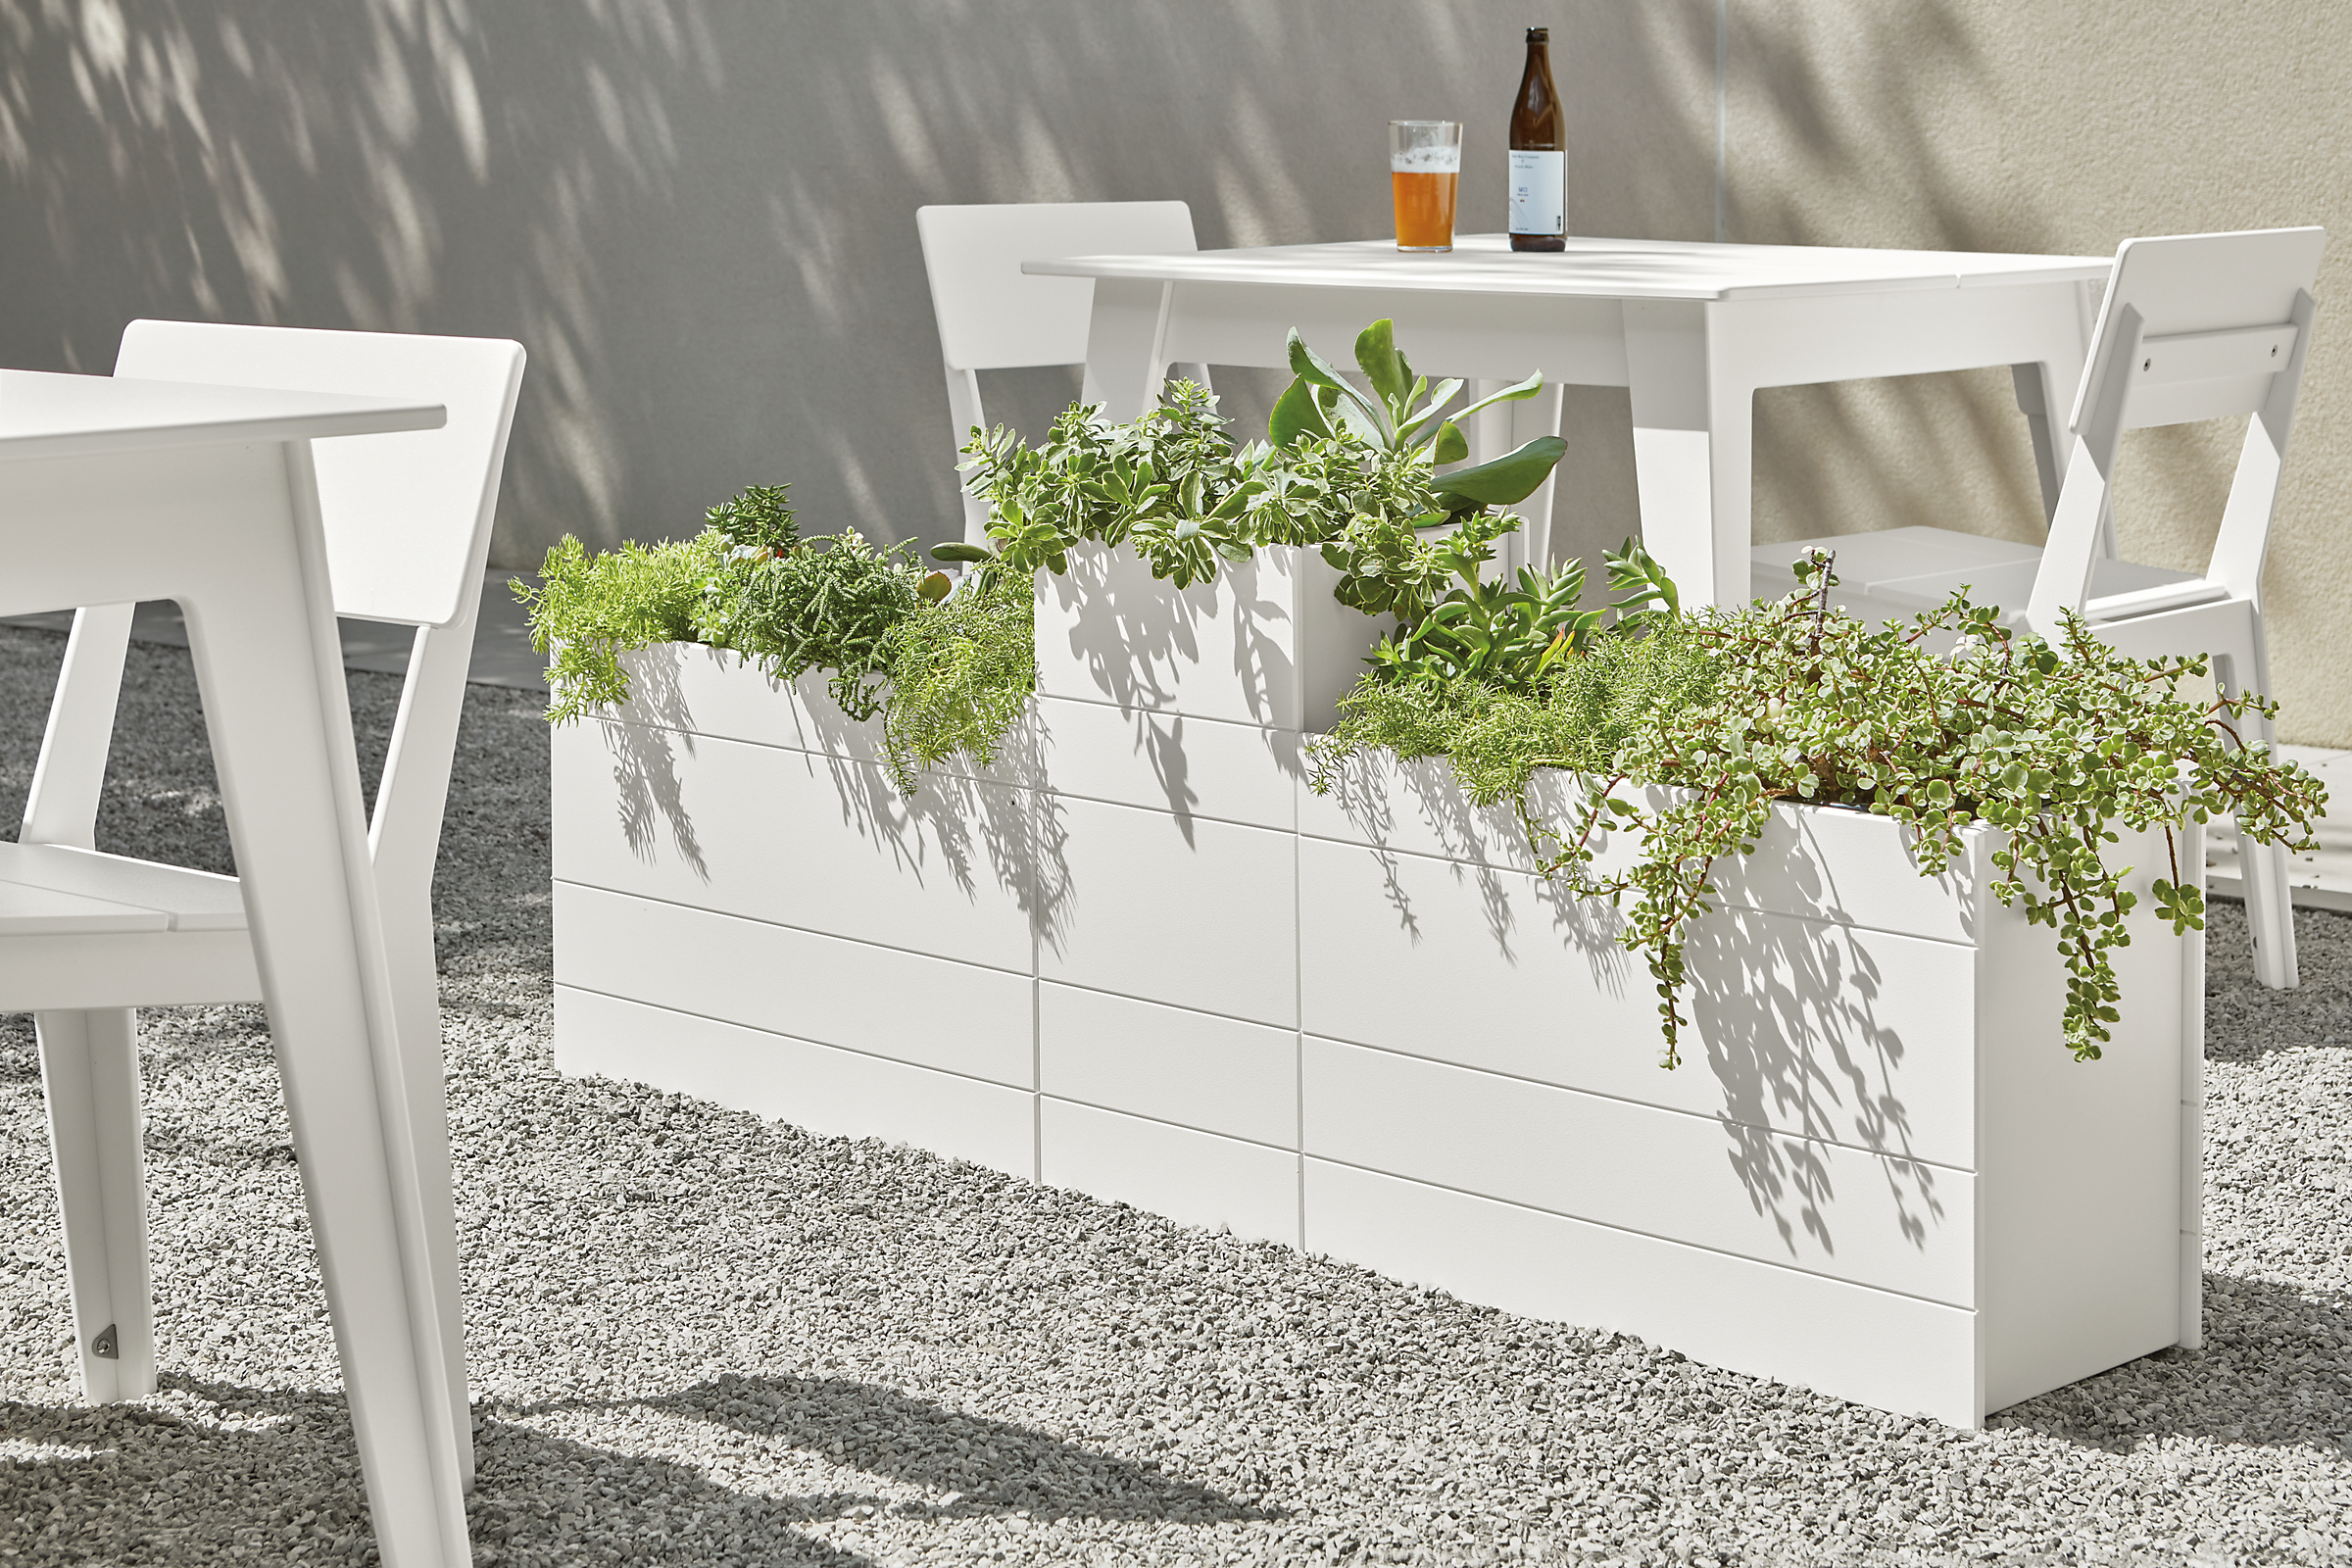 Three Brooklyn planters and Aspen outdoor table and chairs in white.